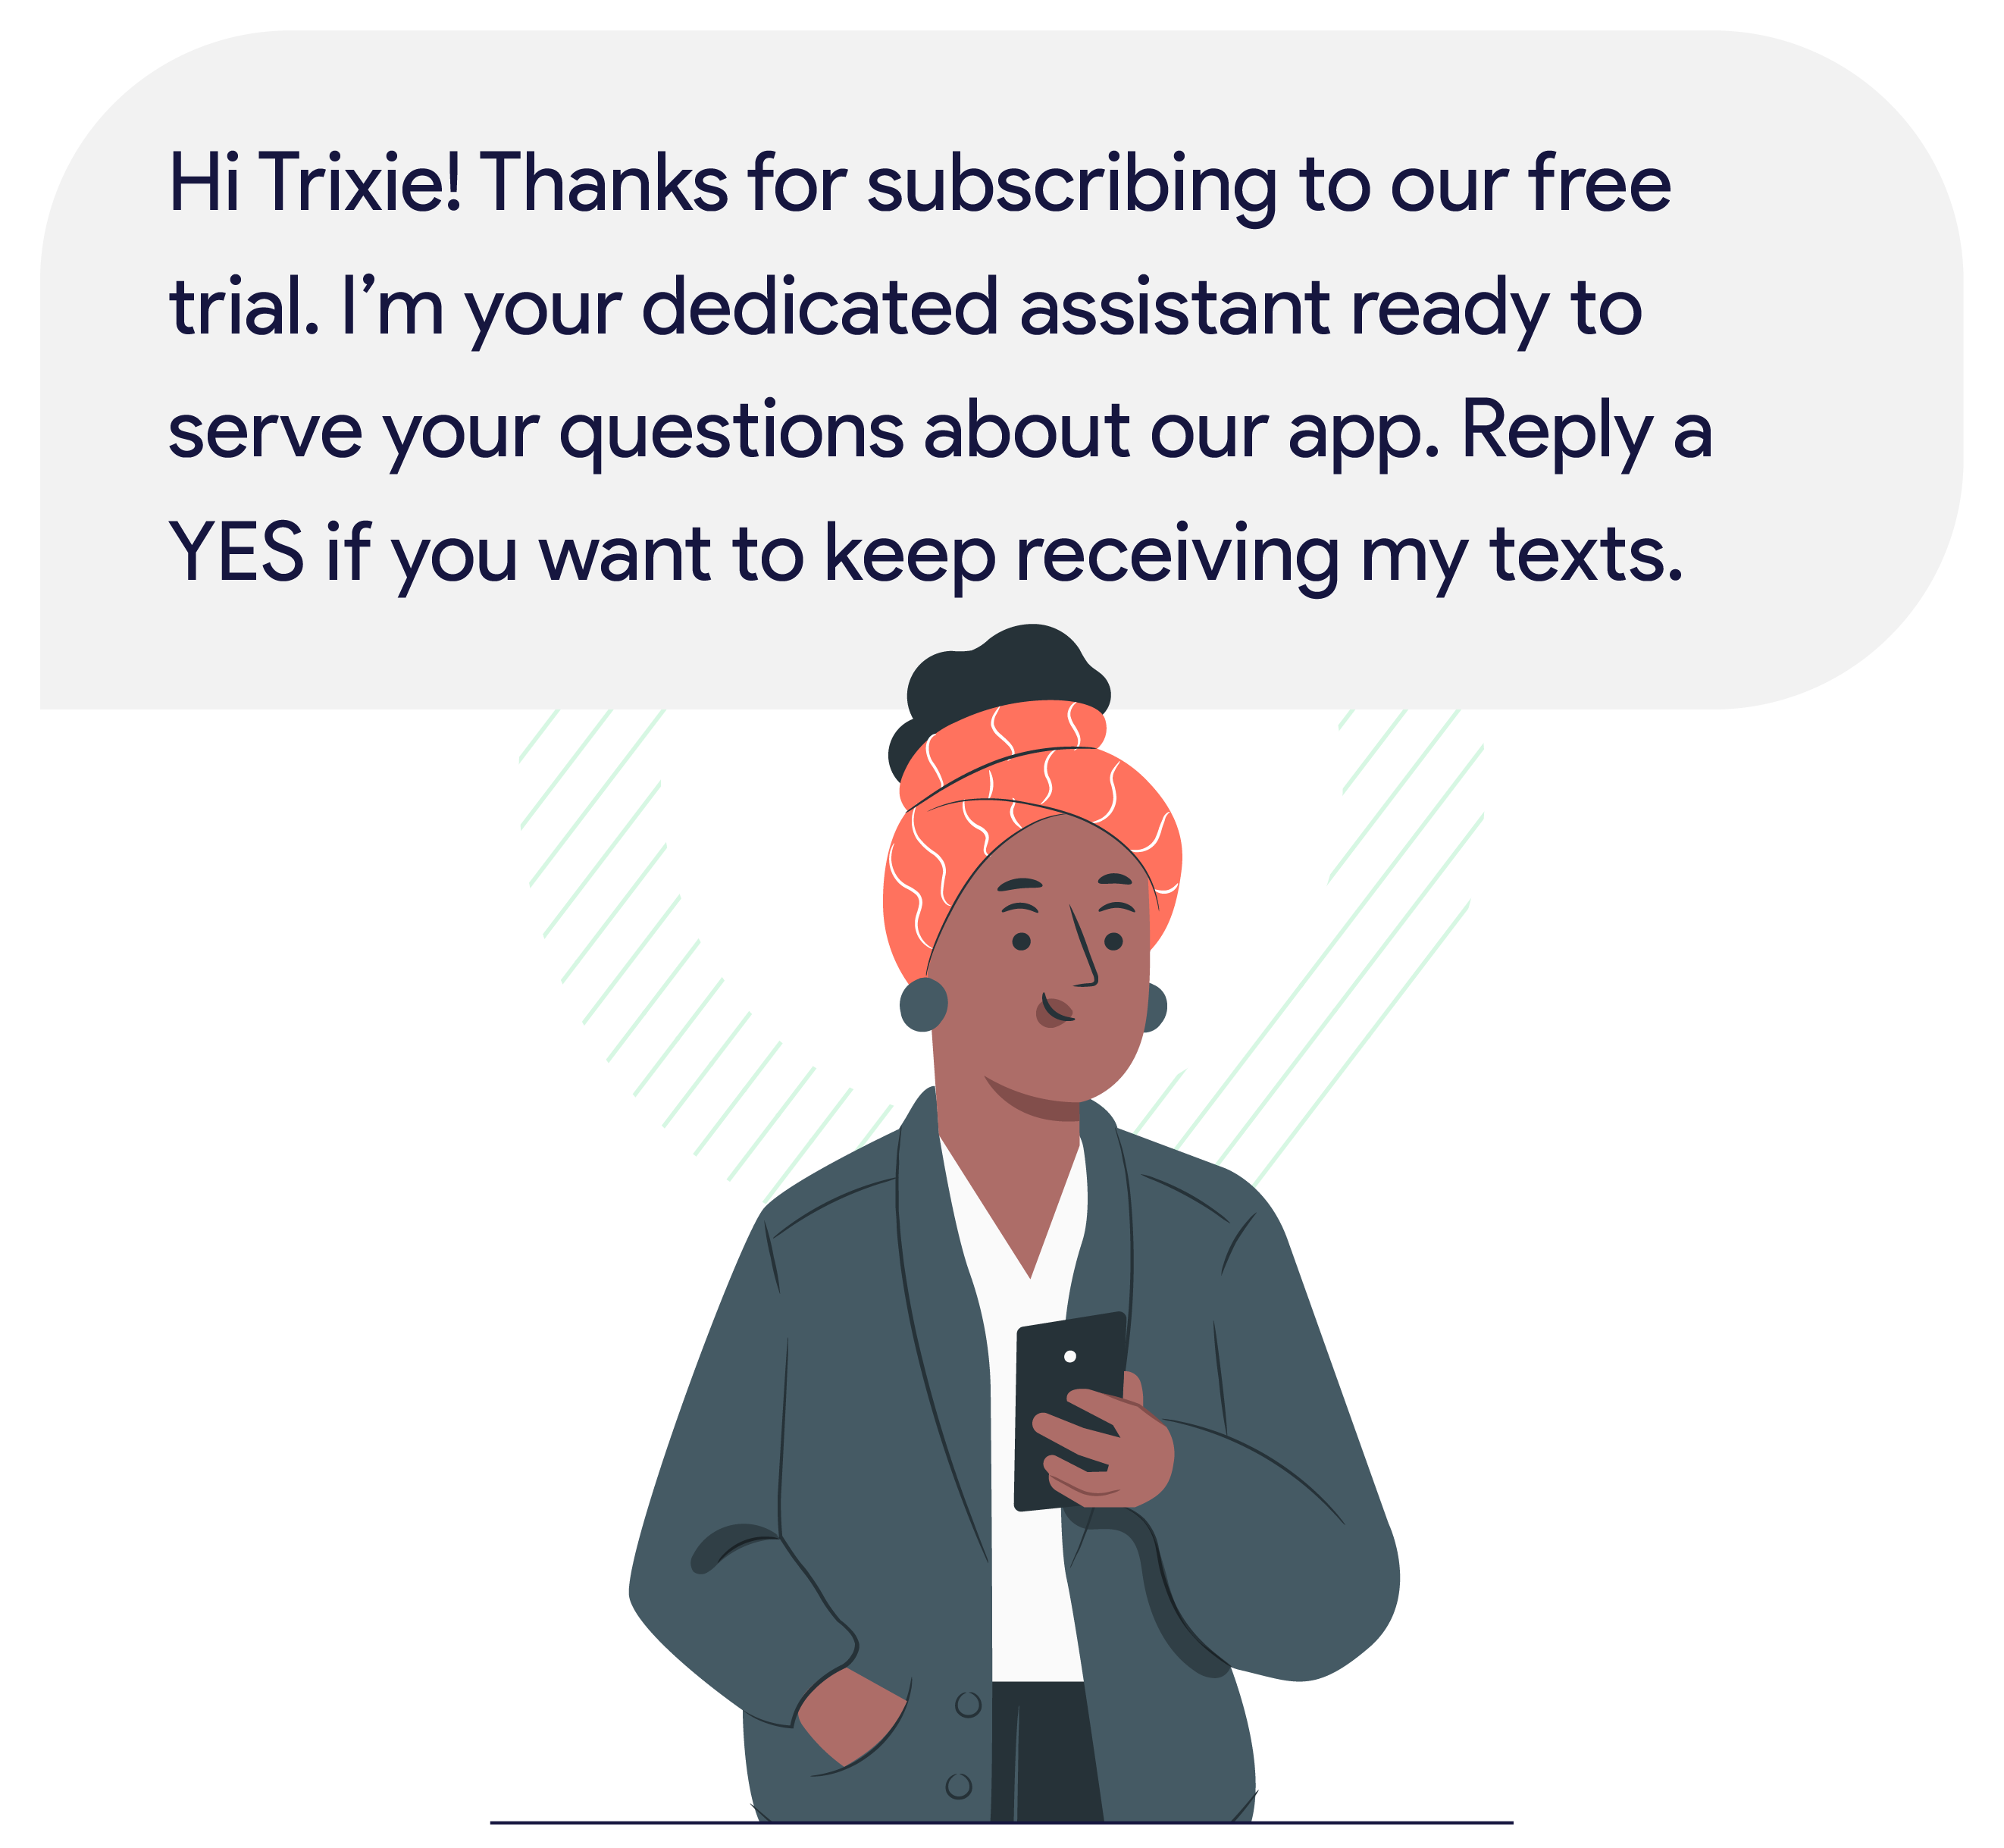 Engage free trial users